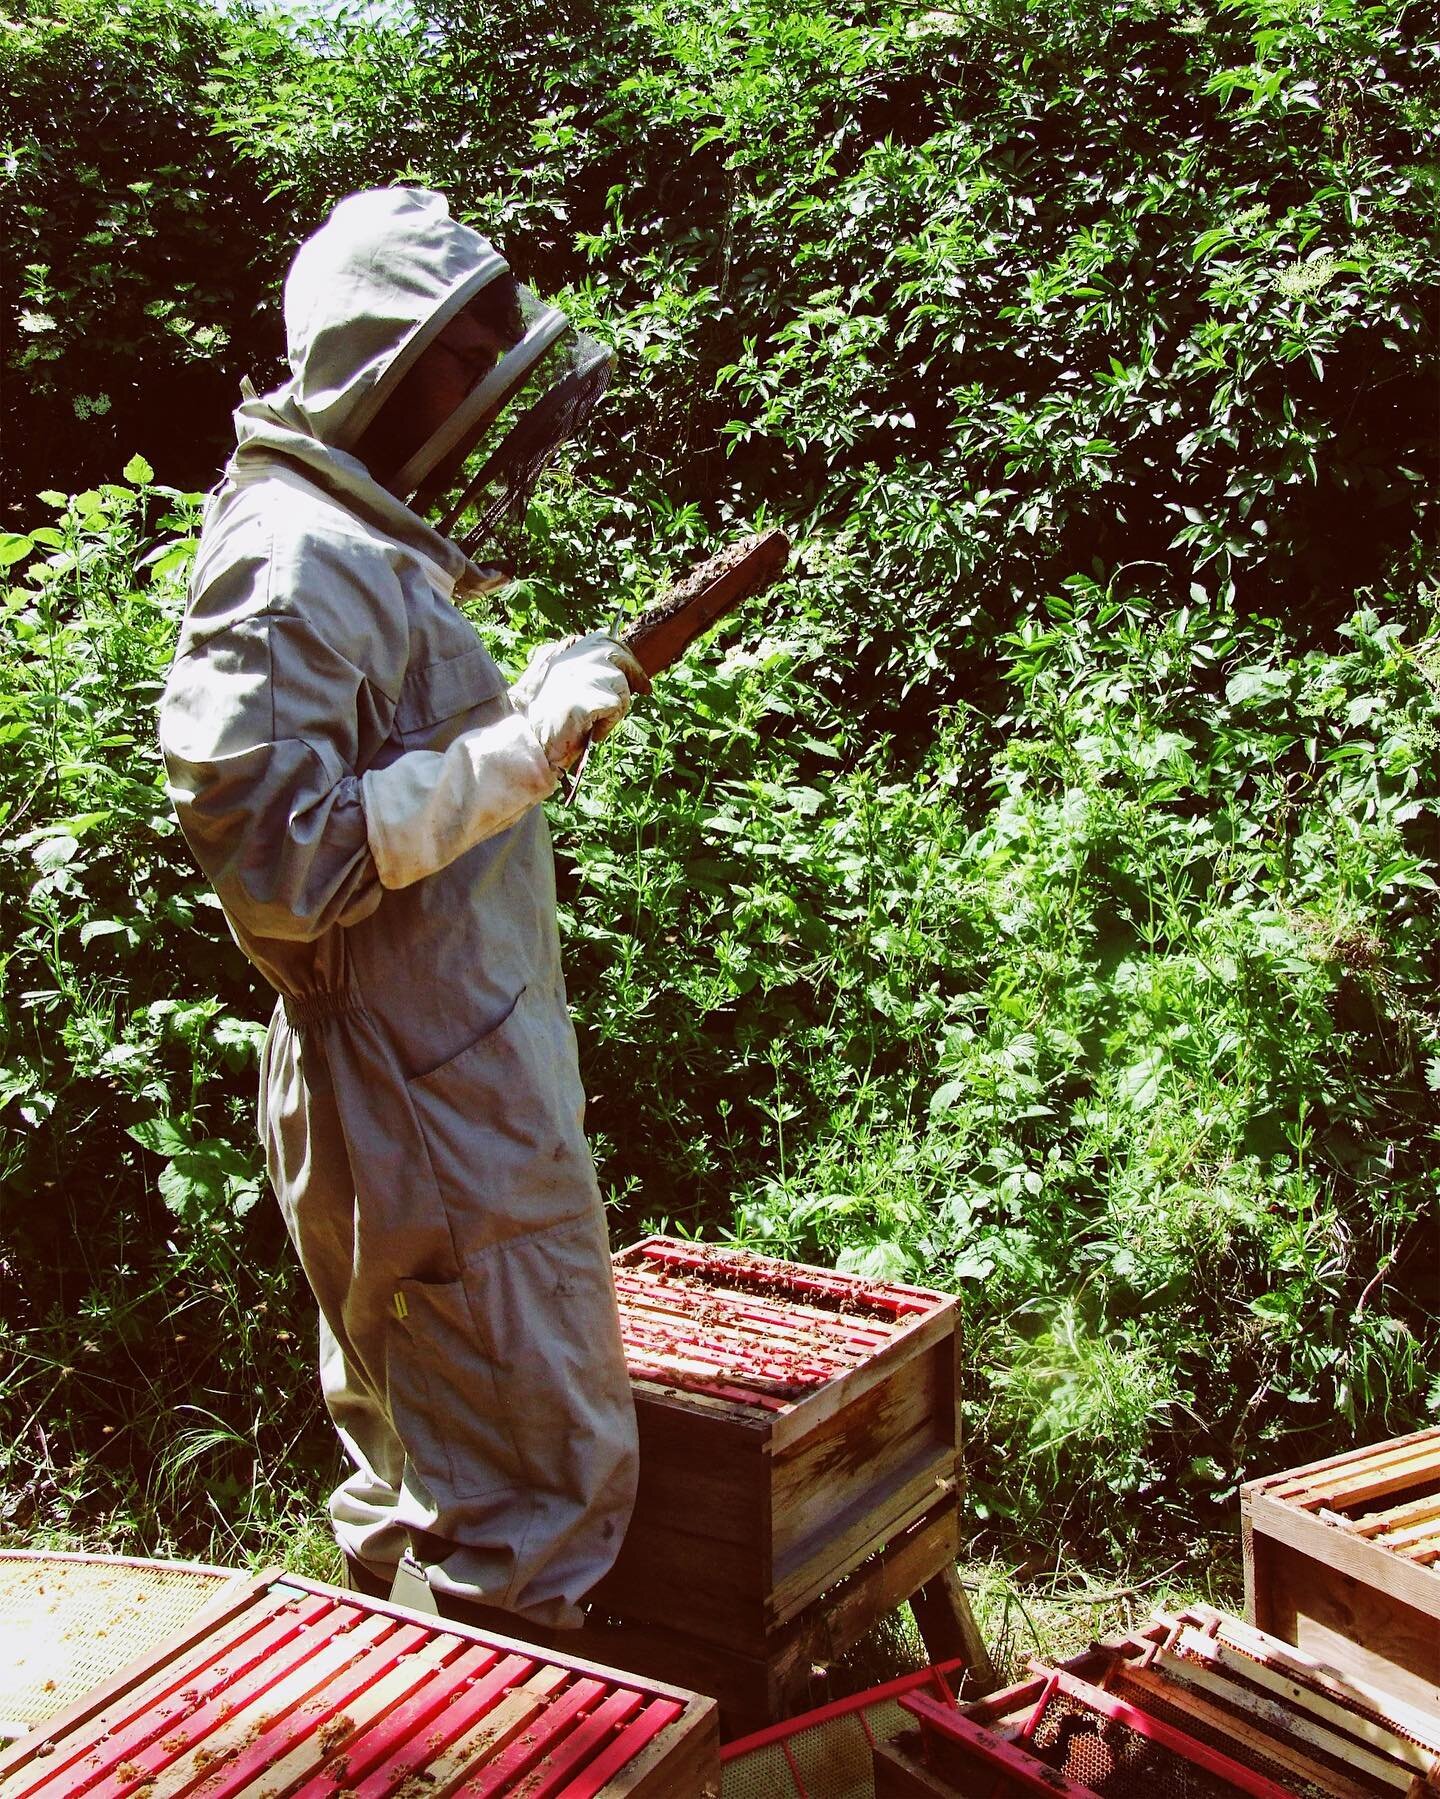 Bee season is in full swing again which meant another busy weekend checking out our hives. 👀 We had to split out our Greenwich hives as they&rsquo;ve gotten so busy there&rsquo;s not enough space for all of our bees! #savethebees #londonbeekeeper 🐝